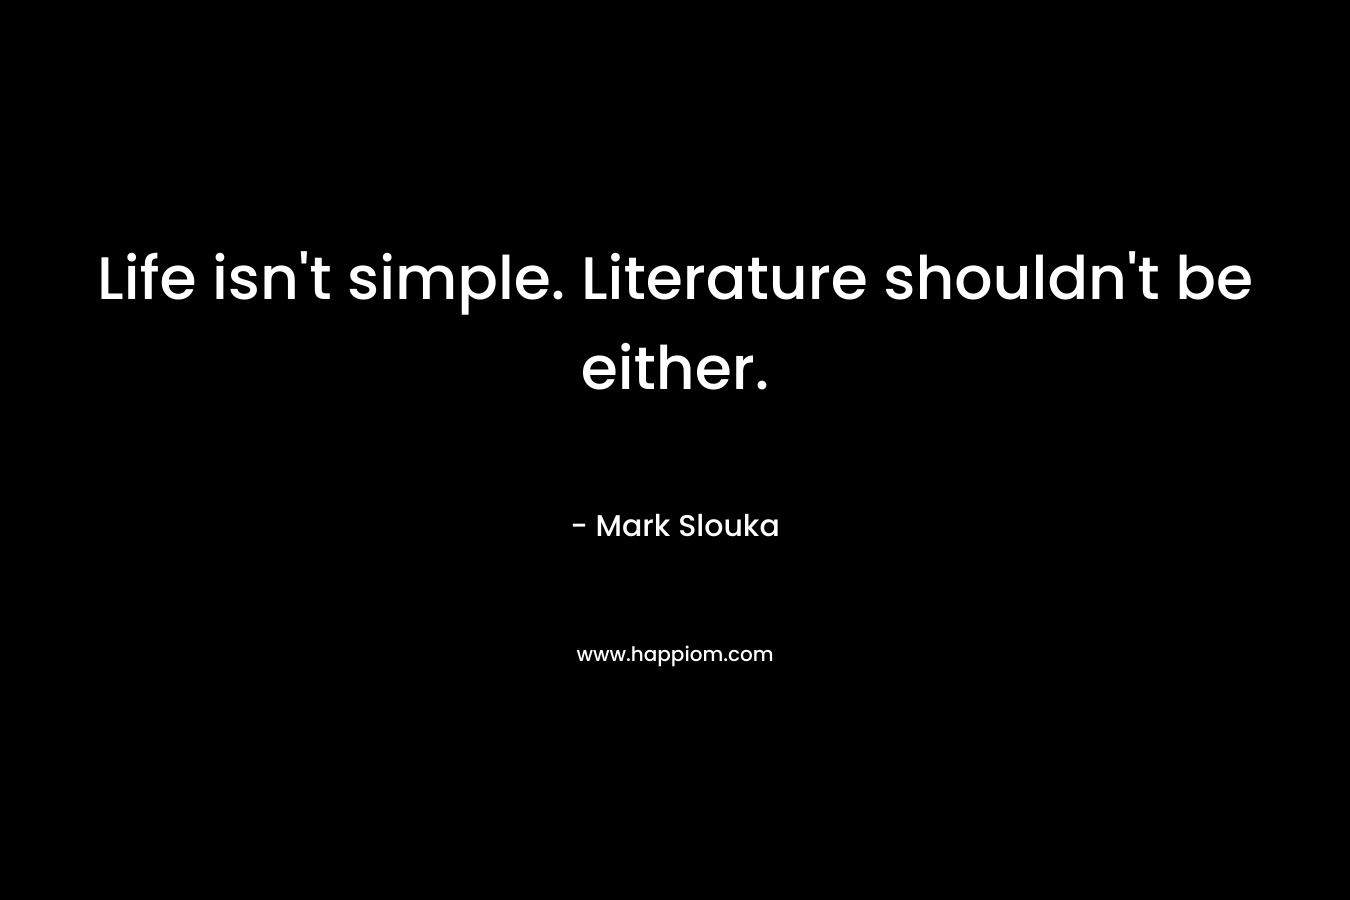 Life isn't simple. Literature shouldn't be either.